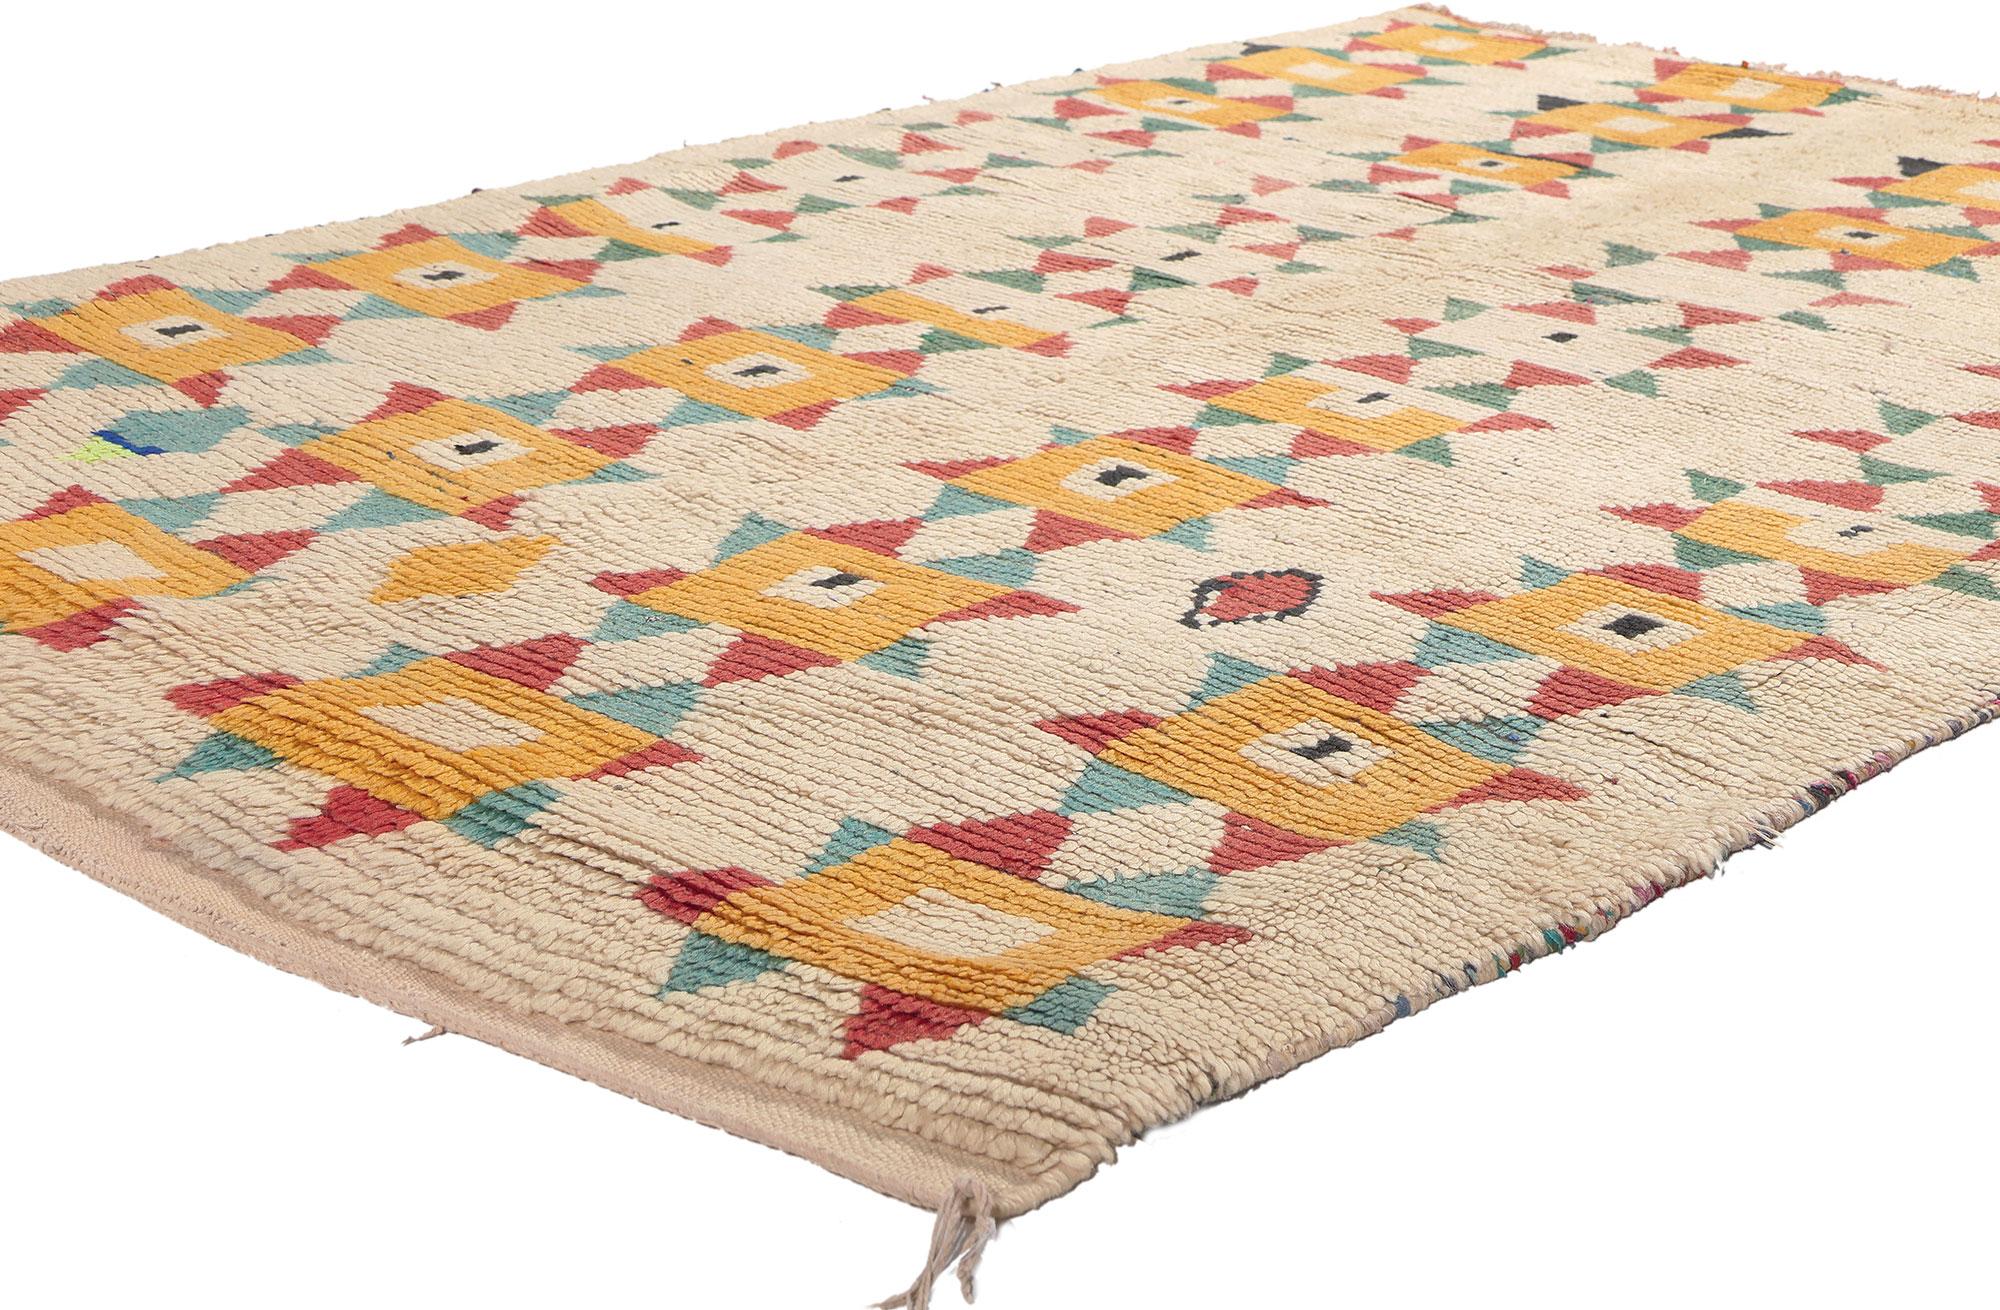 20009 Vintage Moroccan Azilal Rug, 04'07 x 07'00.  Embark n a mystical journey with this hand-knotted wool vintage Moroccan Azilal rug, hailing from the serene landscapes of the High Atlas Mountains. A magical carpet ride awaits as you explore the